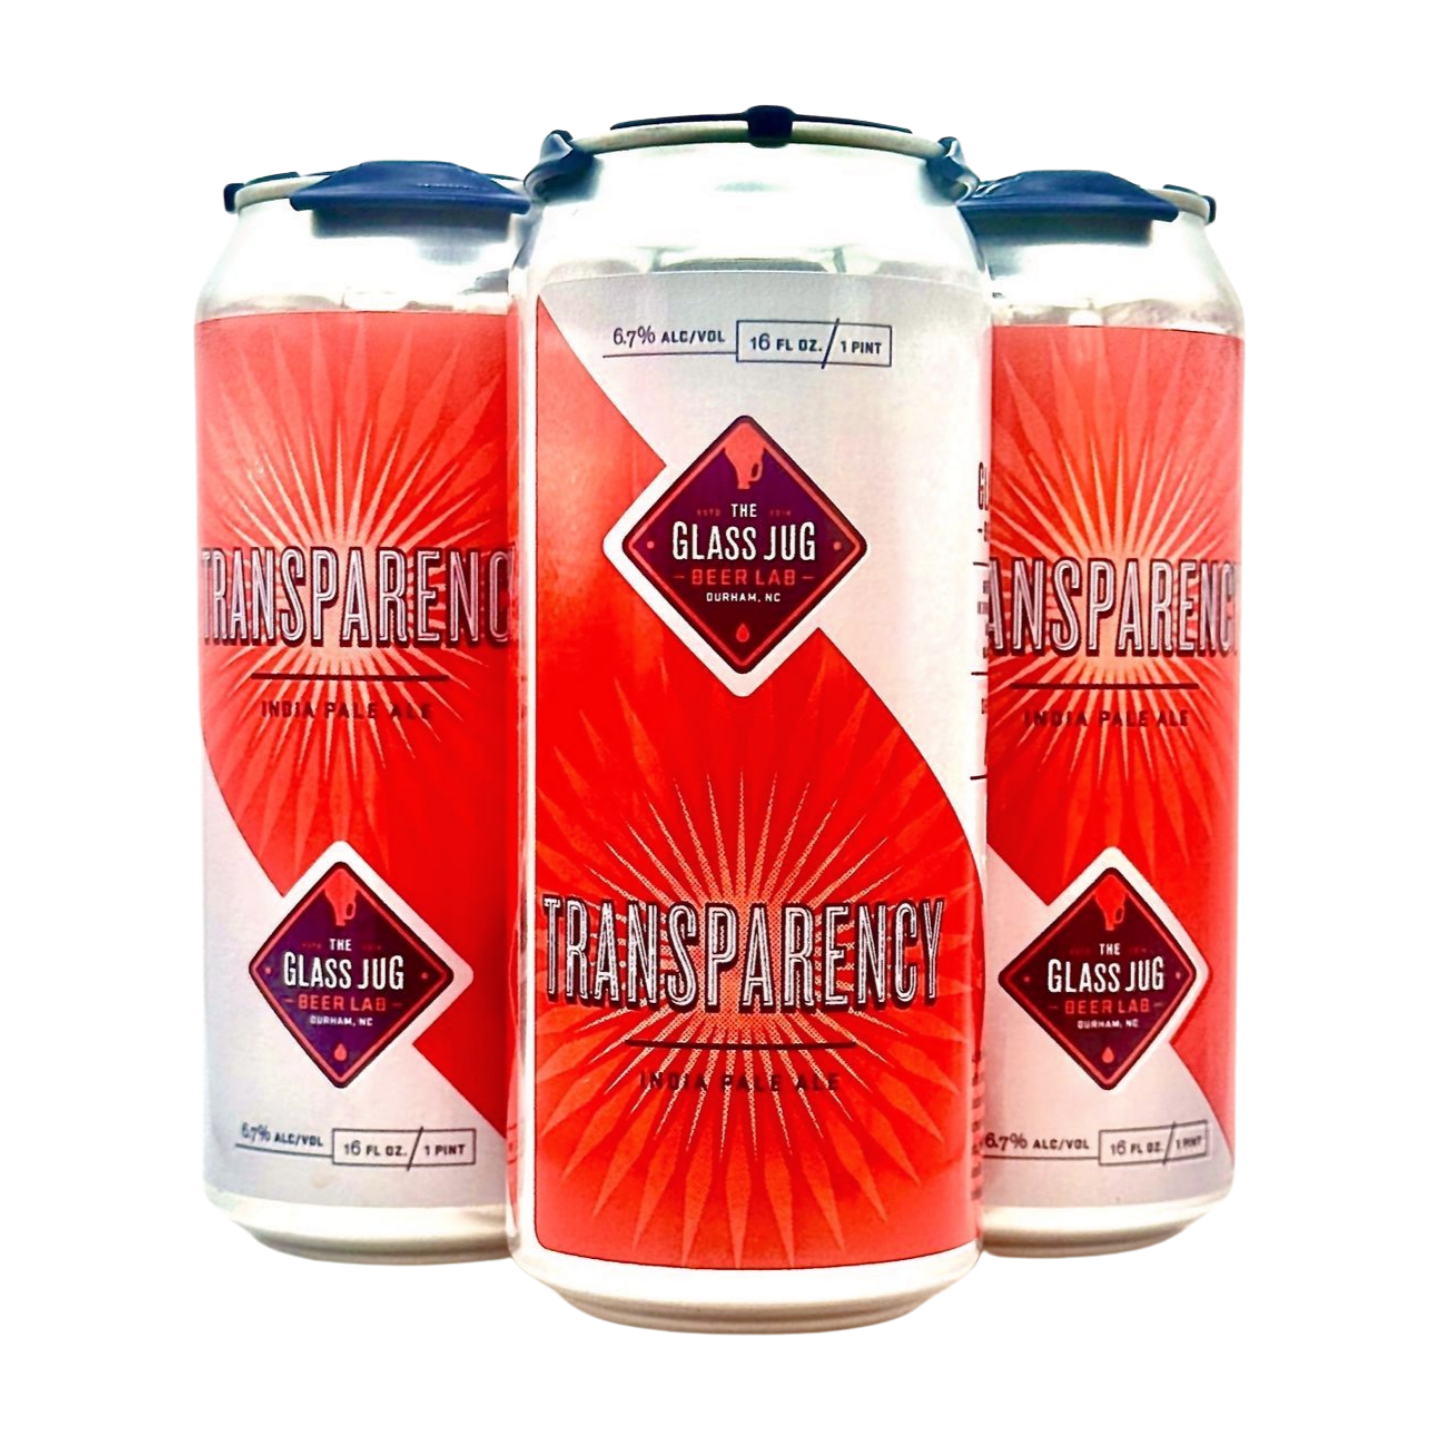 Transparency, 16 oz cans, 4 pack